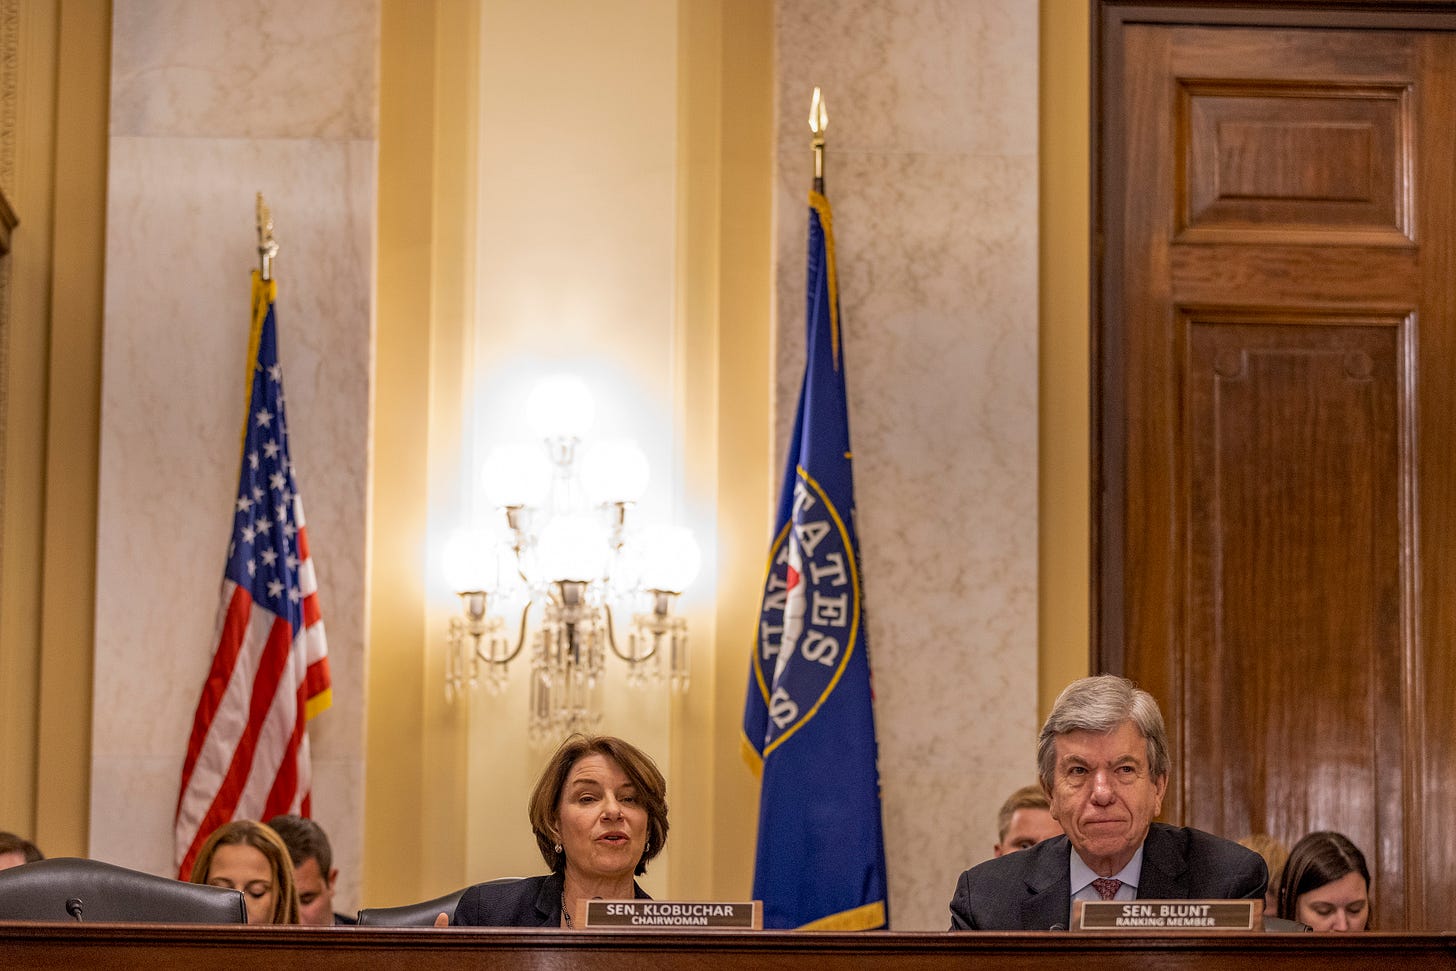 Sen. Amy Klobuchar (D-MN) and Sen. Roy Blunt (R-MO) attend a meeting of the Senate Committee on Rules and Administration on Capitol Hill on September 27, 2022 in Washington, DC. (Photo by Tasos Katopodis/Getty Images)